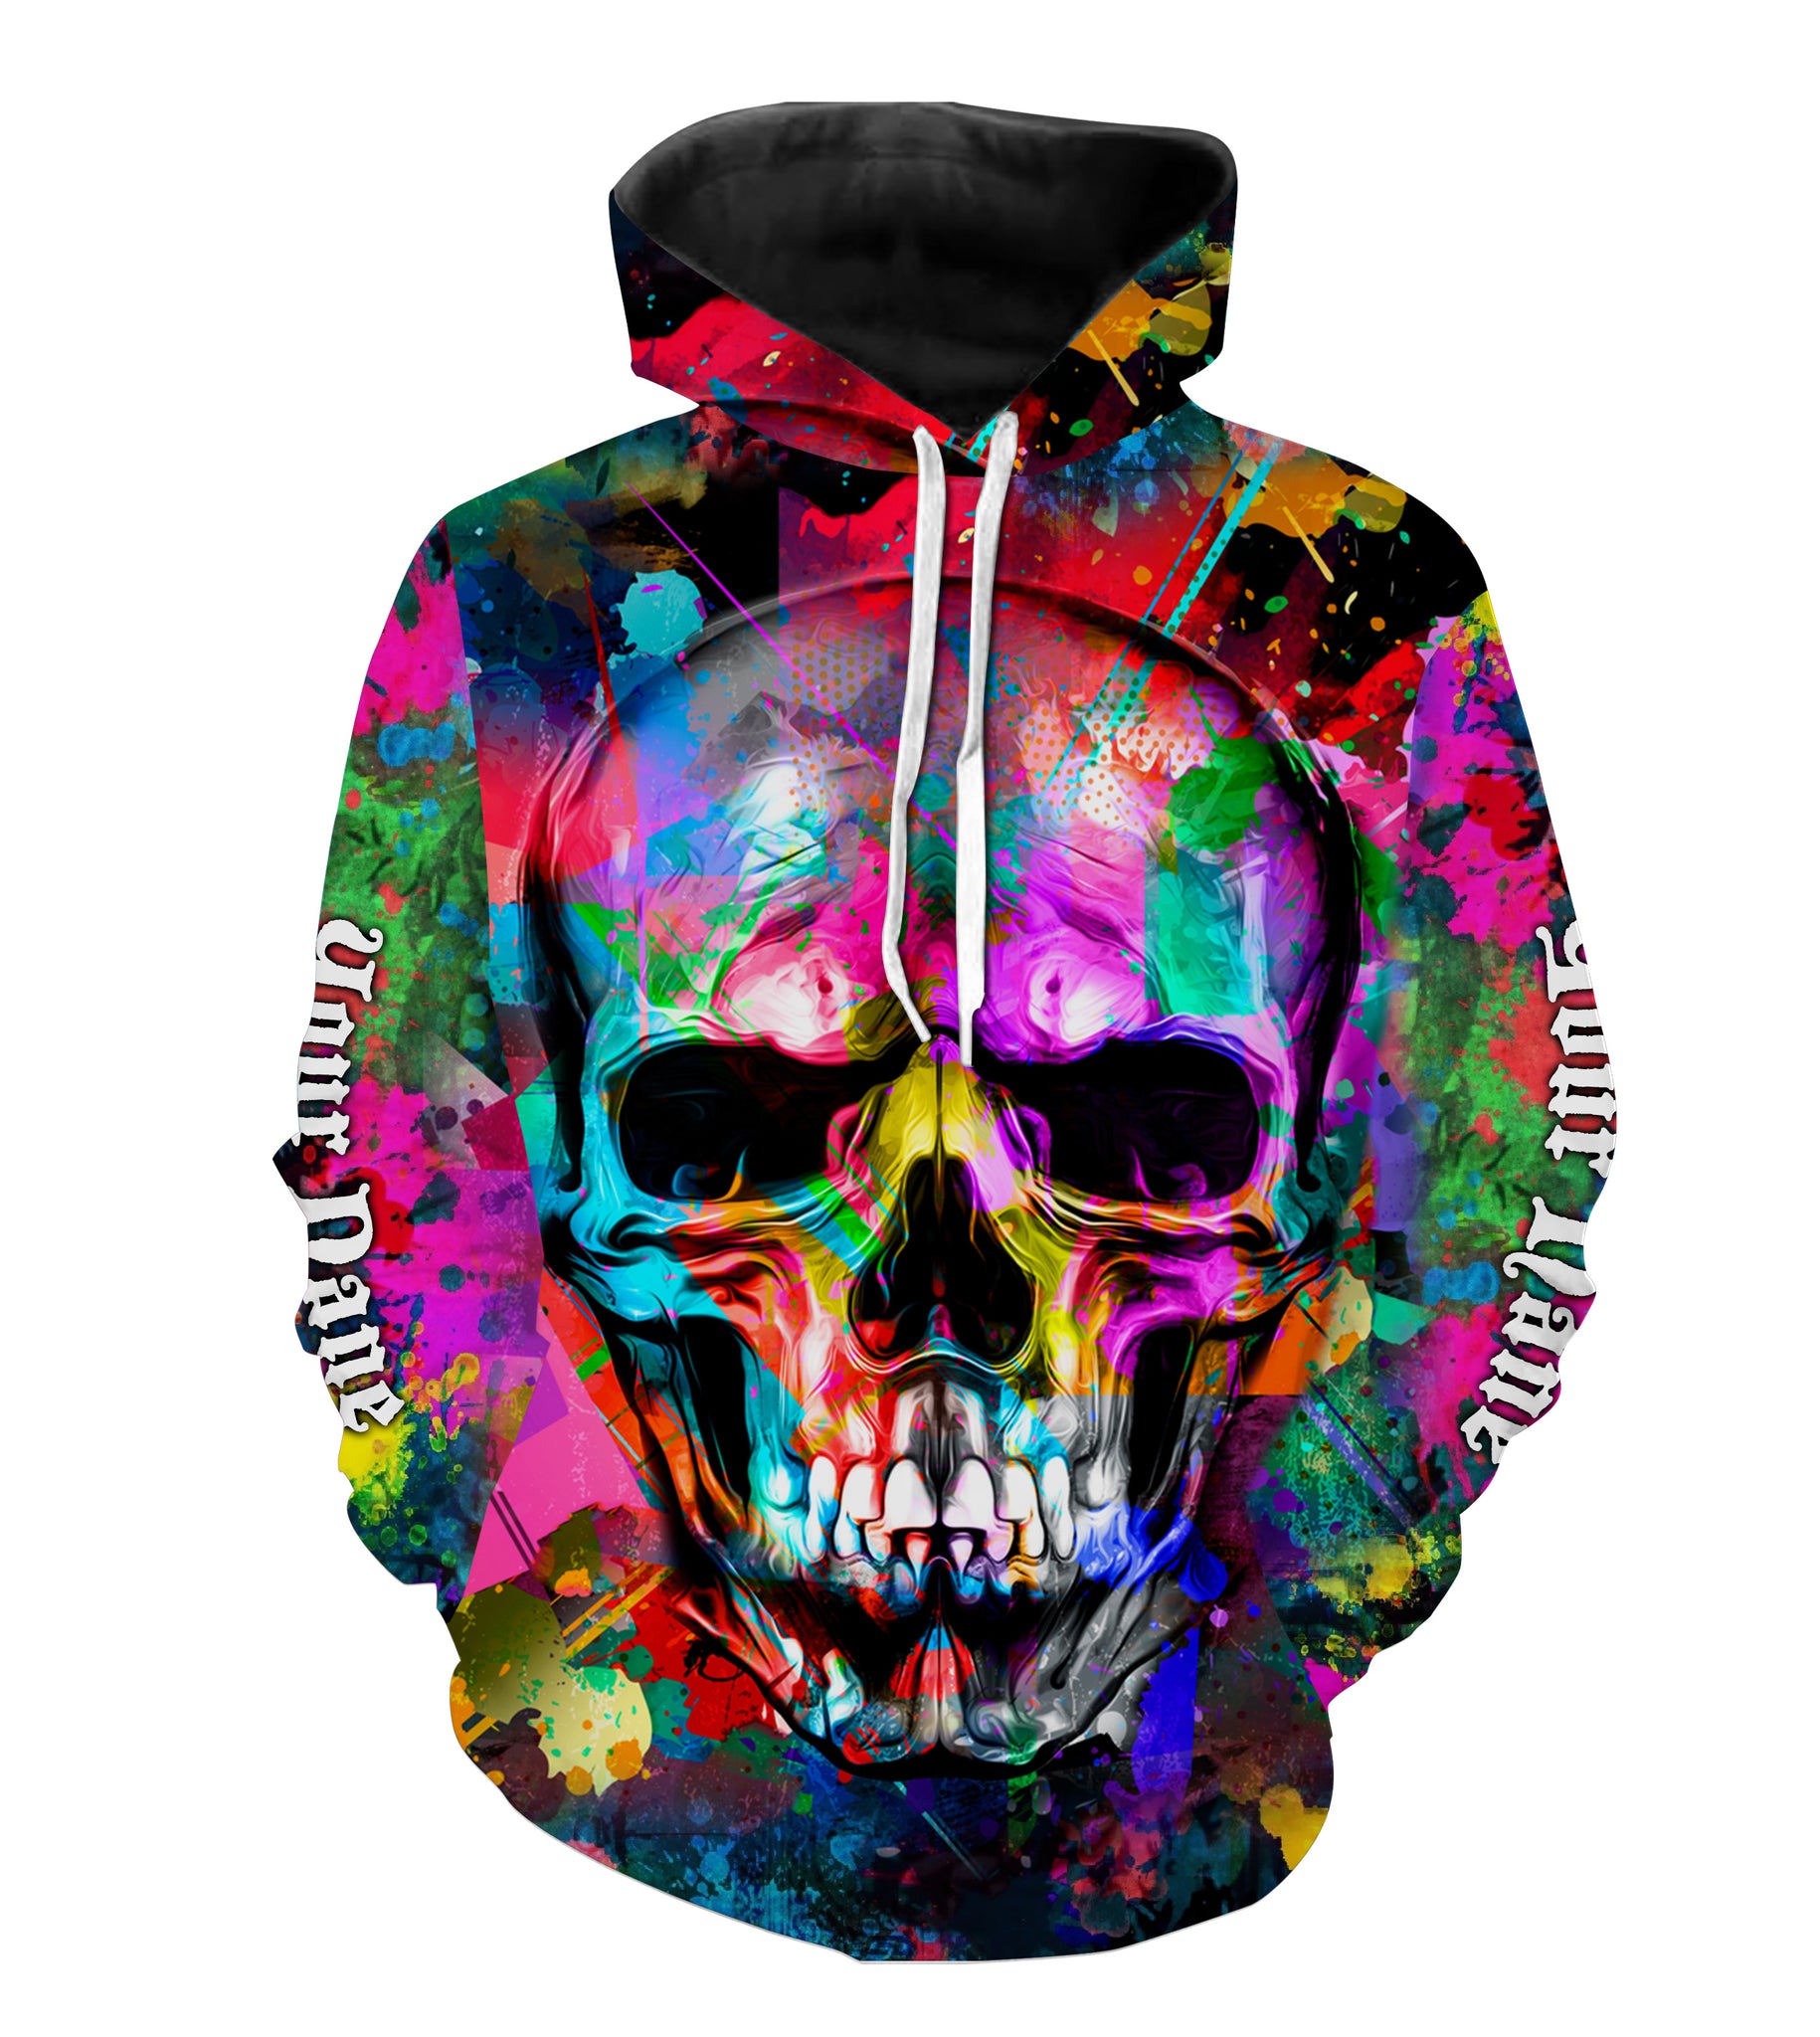 Skull Colorful 3D All Over Printed Shirts, Hoodie - Personalized Gifts for Men, Women and Kid - FSD2580